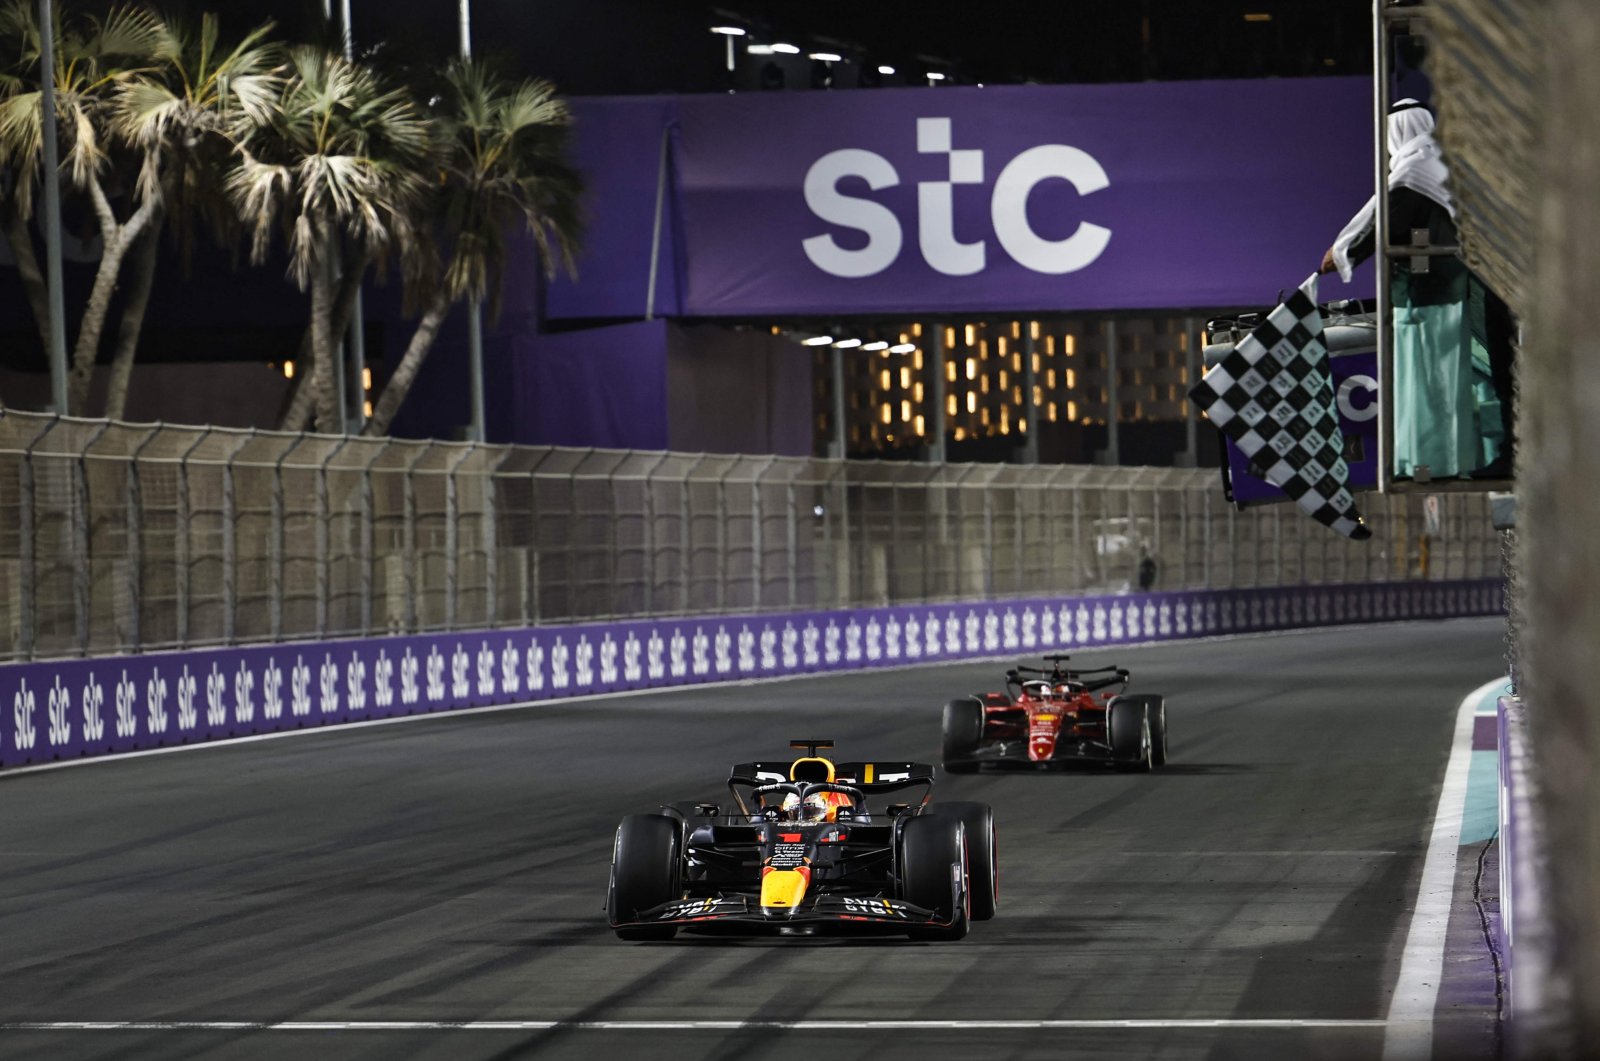 Red Bull&#039;s Dutch driver Max Verstappen (foreground) crosses the start/finish line to win the 2022 Saudi Arabia Formula One Grand Prix at the Jeddah Corniche Circuit, March 27, 2022. (AFP Photo)